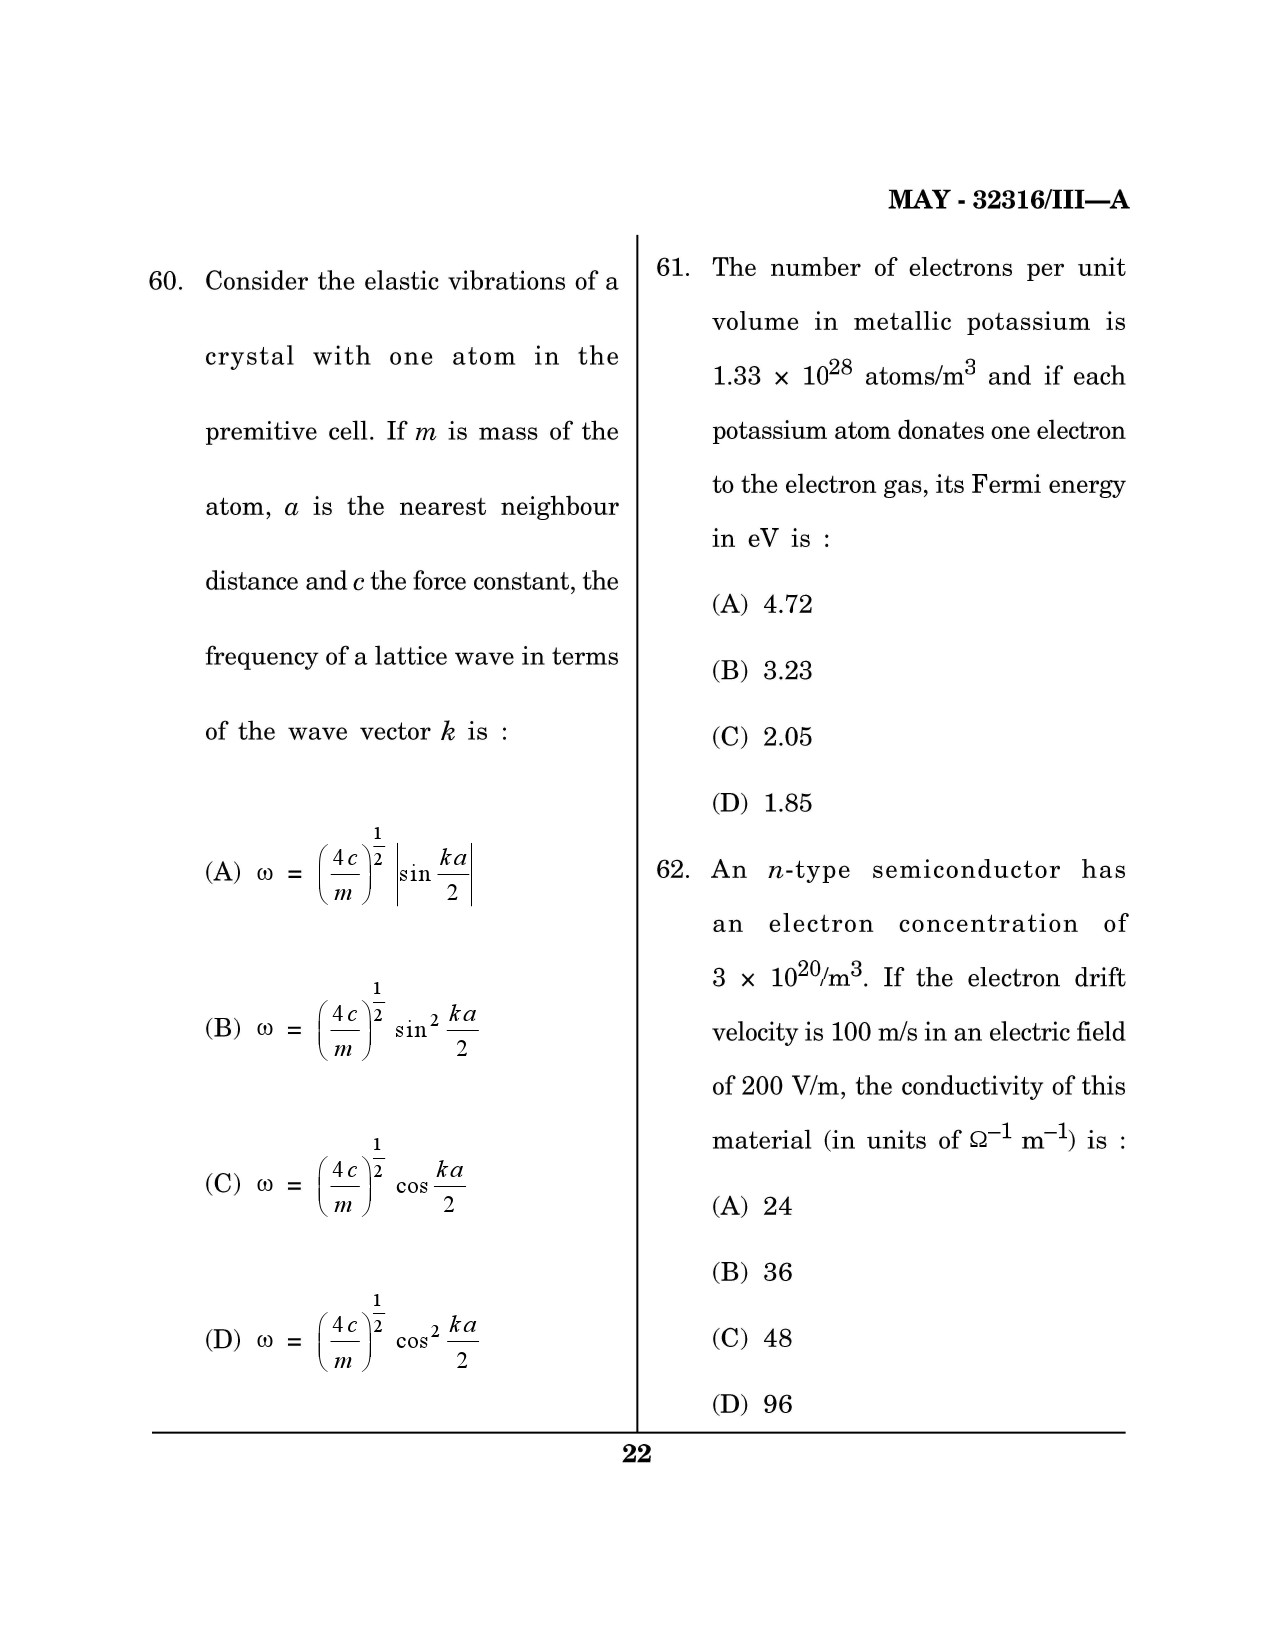 Maharashtra SET Physical Science Question Paper III May 2016 21